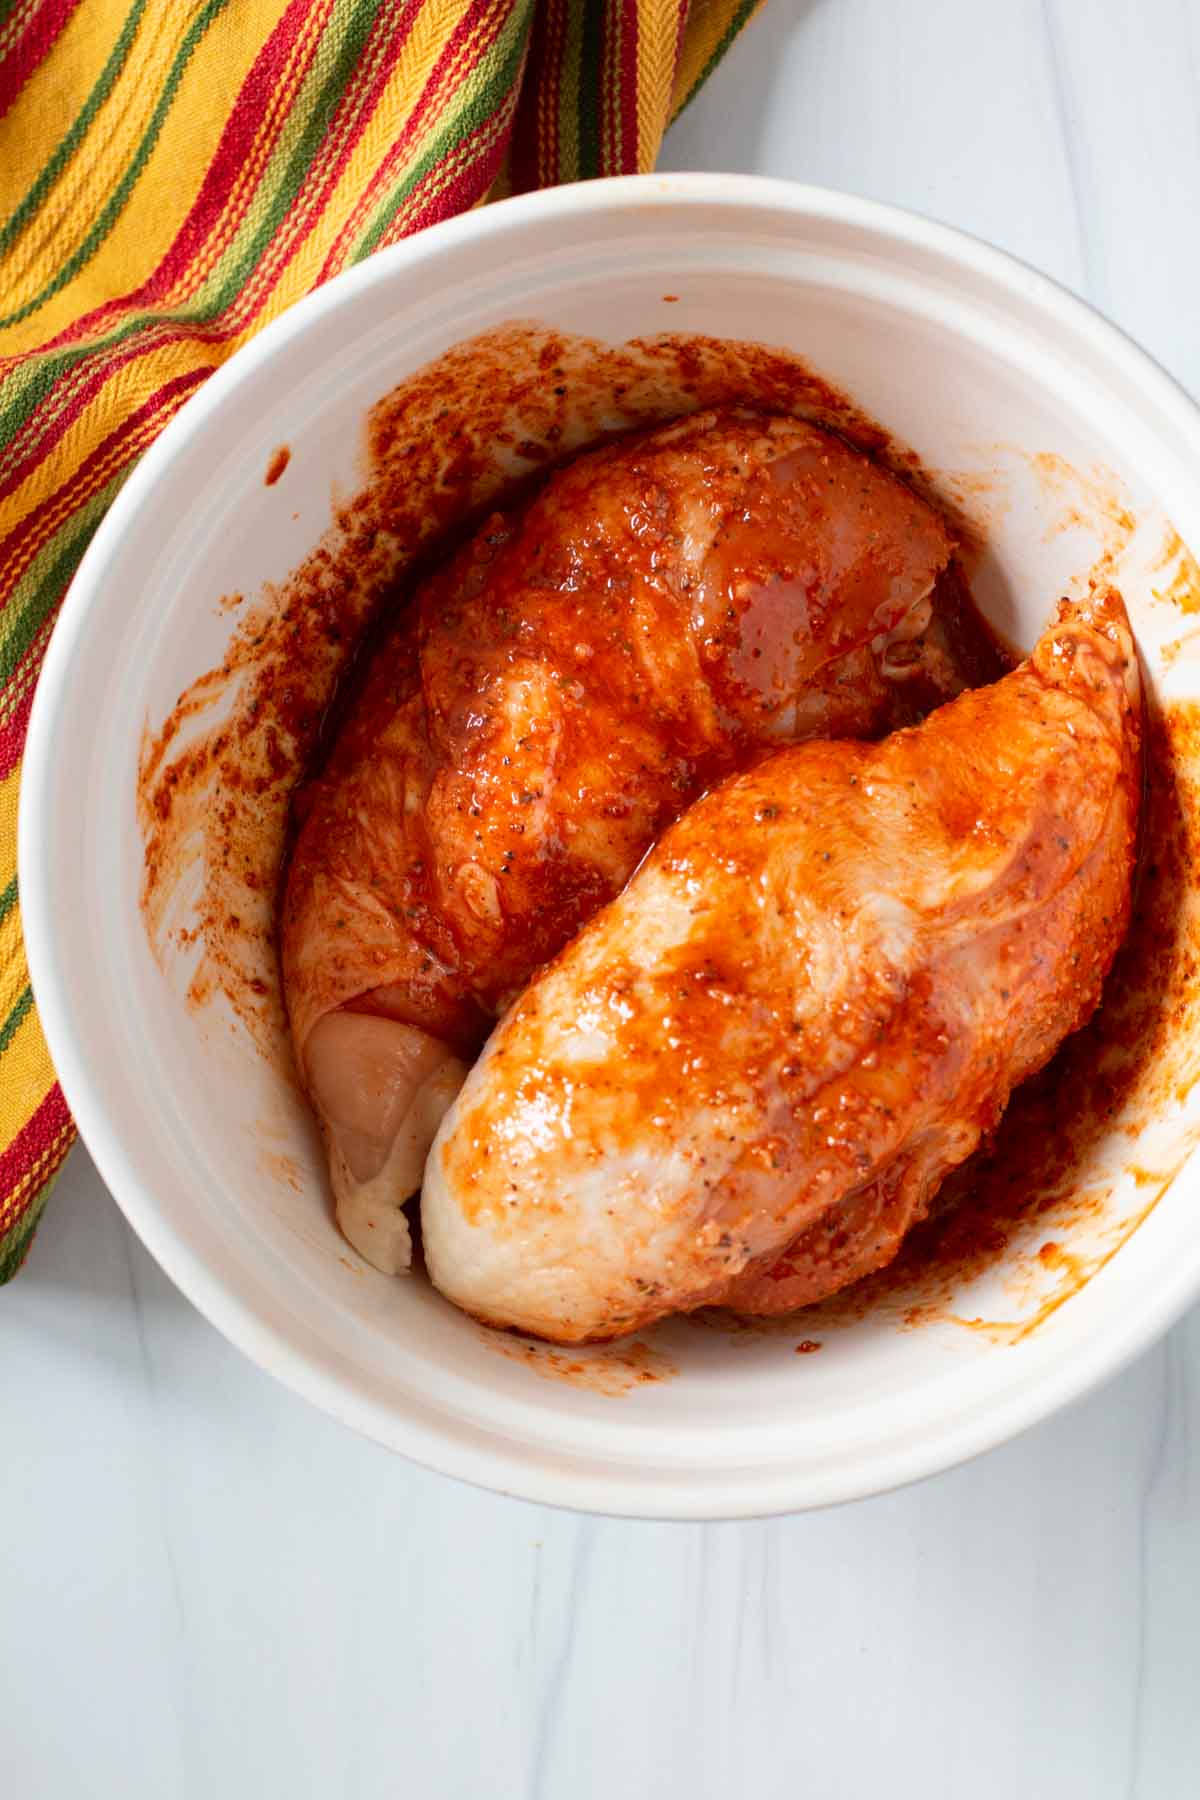 Chicken breasts marinating in achiote sauce.